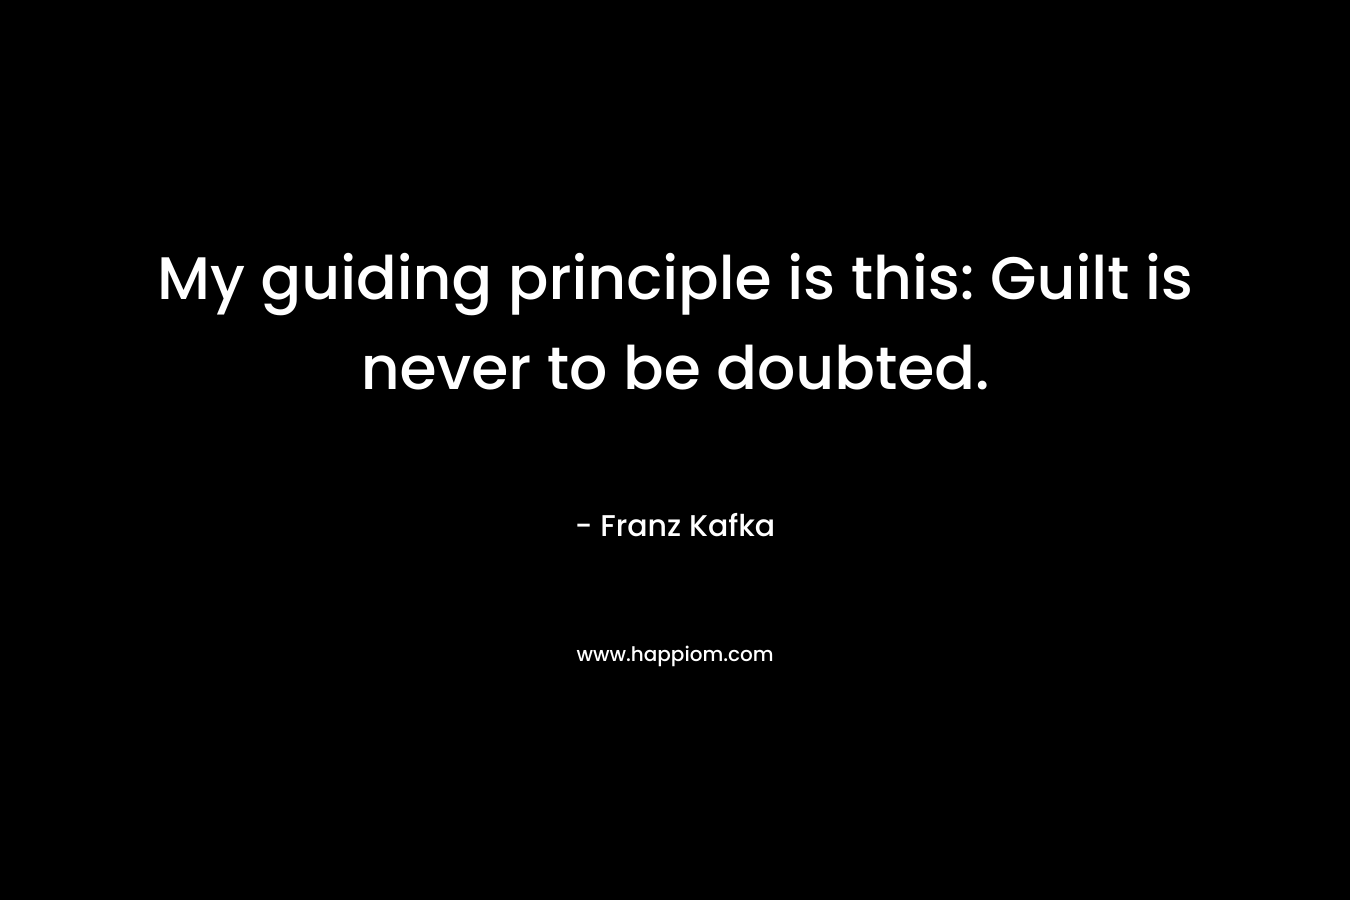 My guiding principle is this: Guilt is never to be doubted.